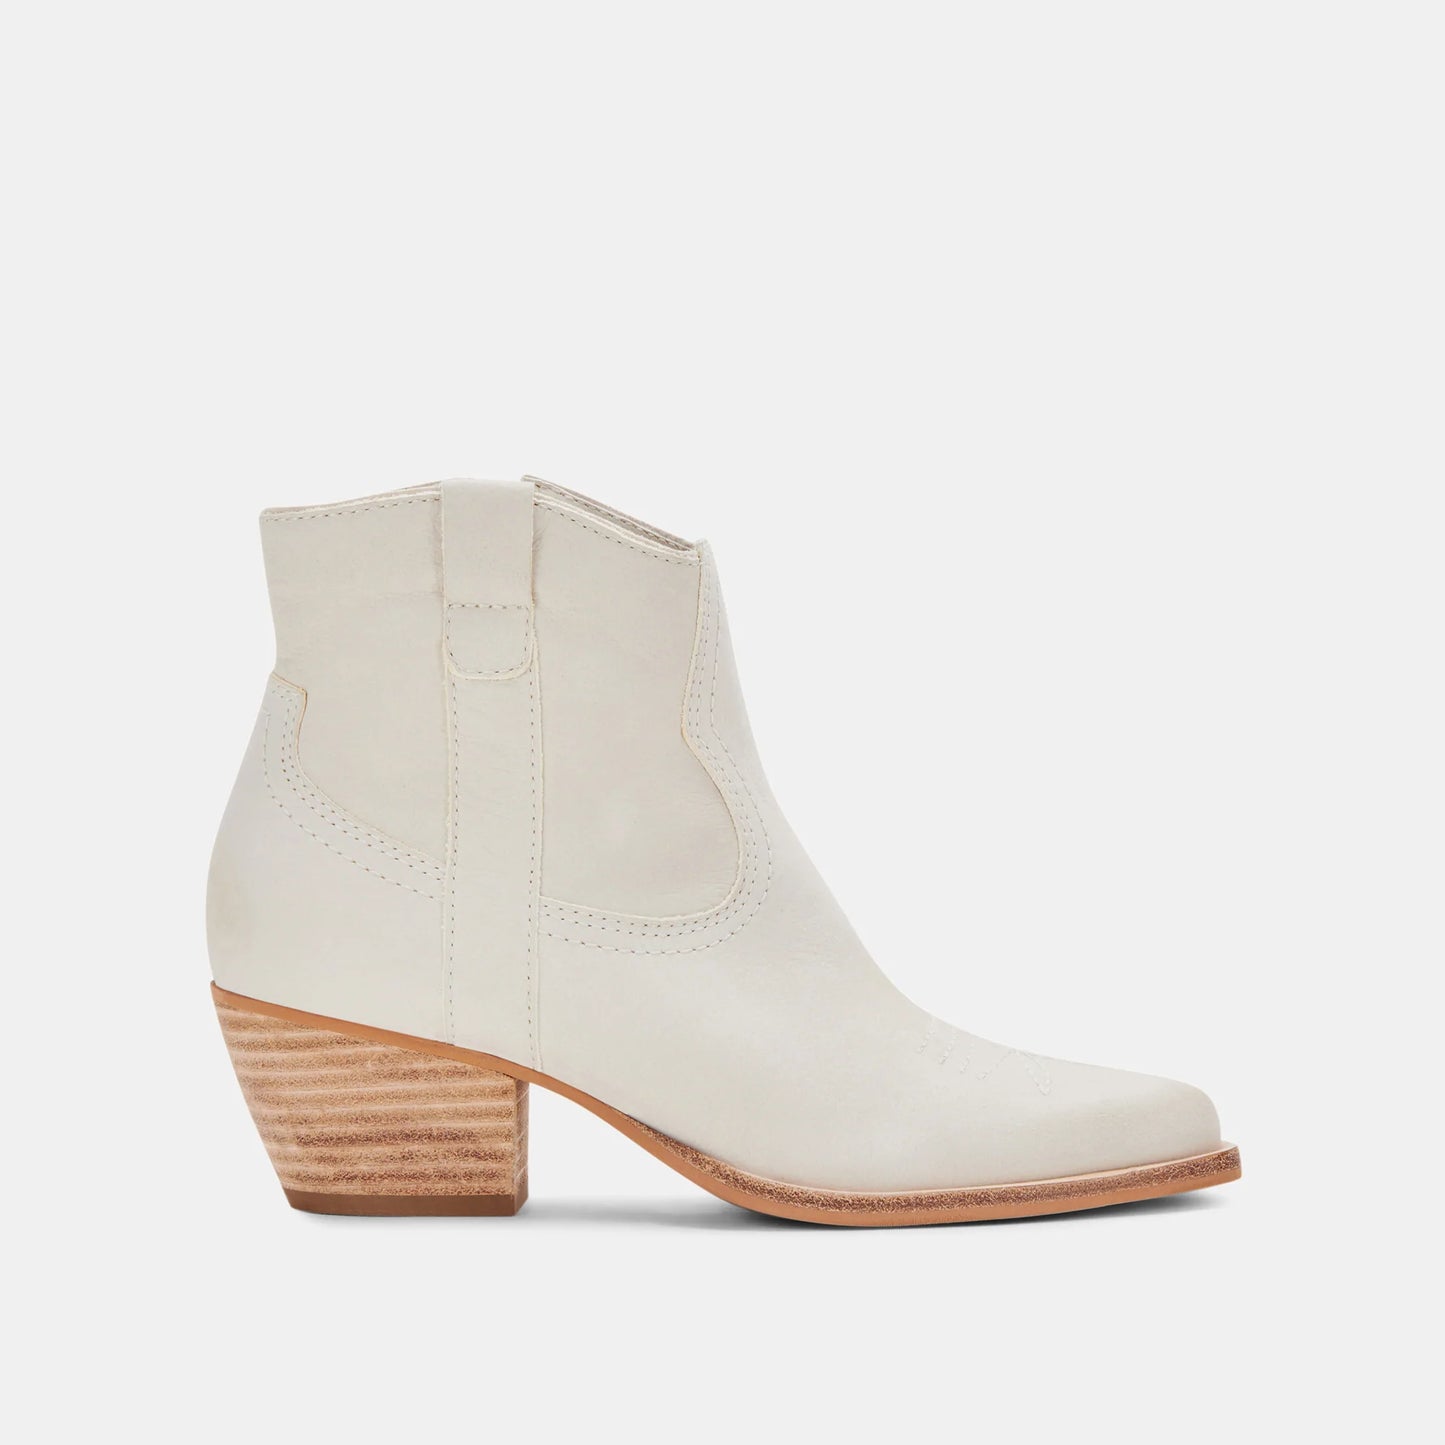 Dolce Vita Silma Suede Bootie